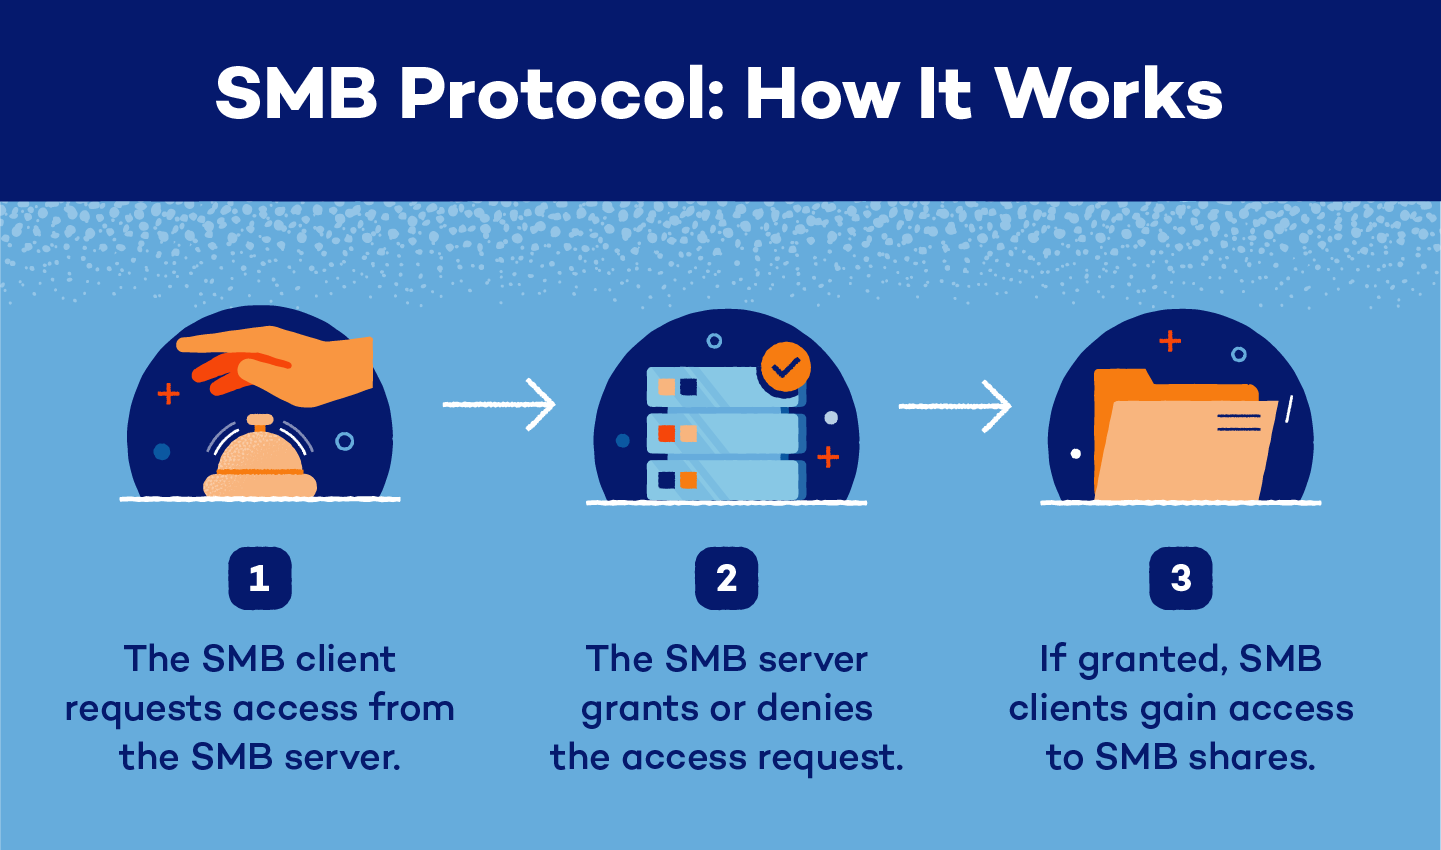 Three step SMB protocol system starting with the client and ending with share access.